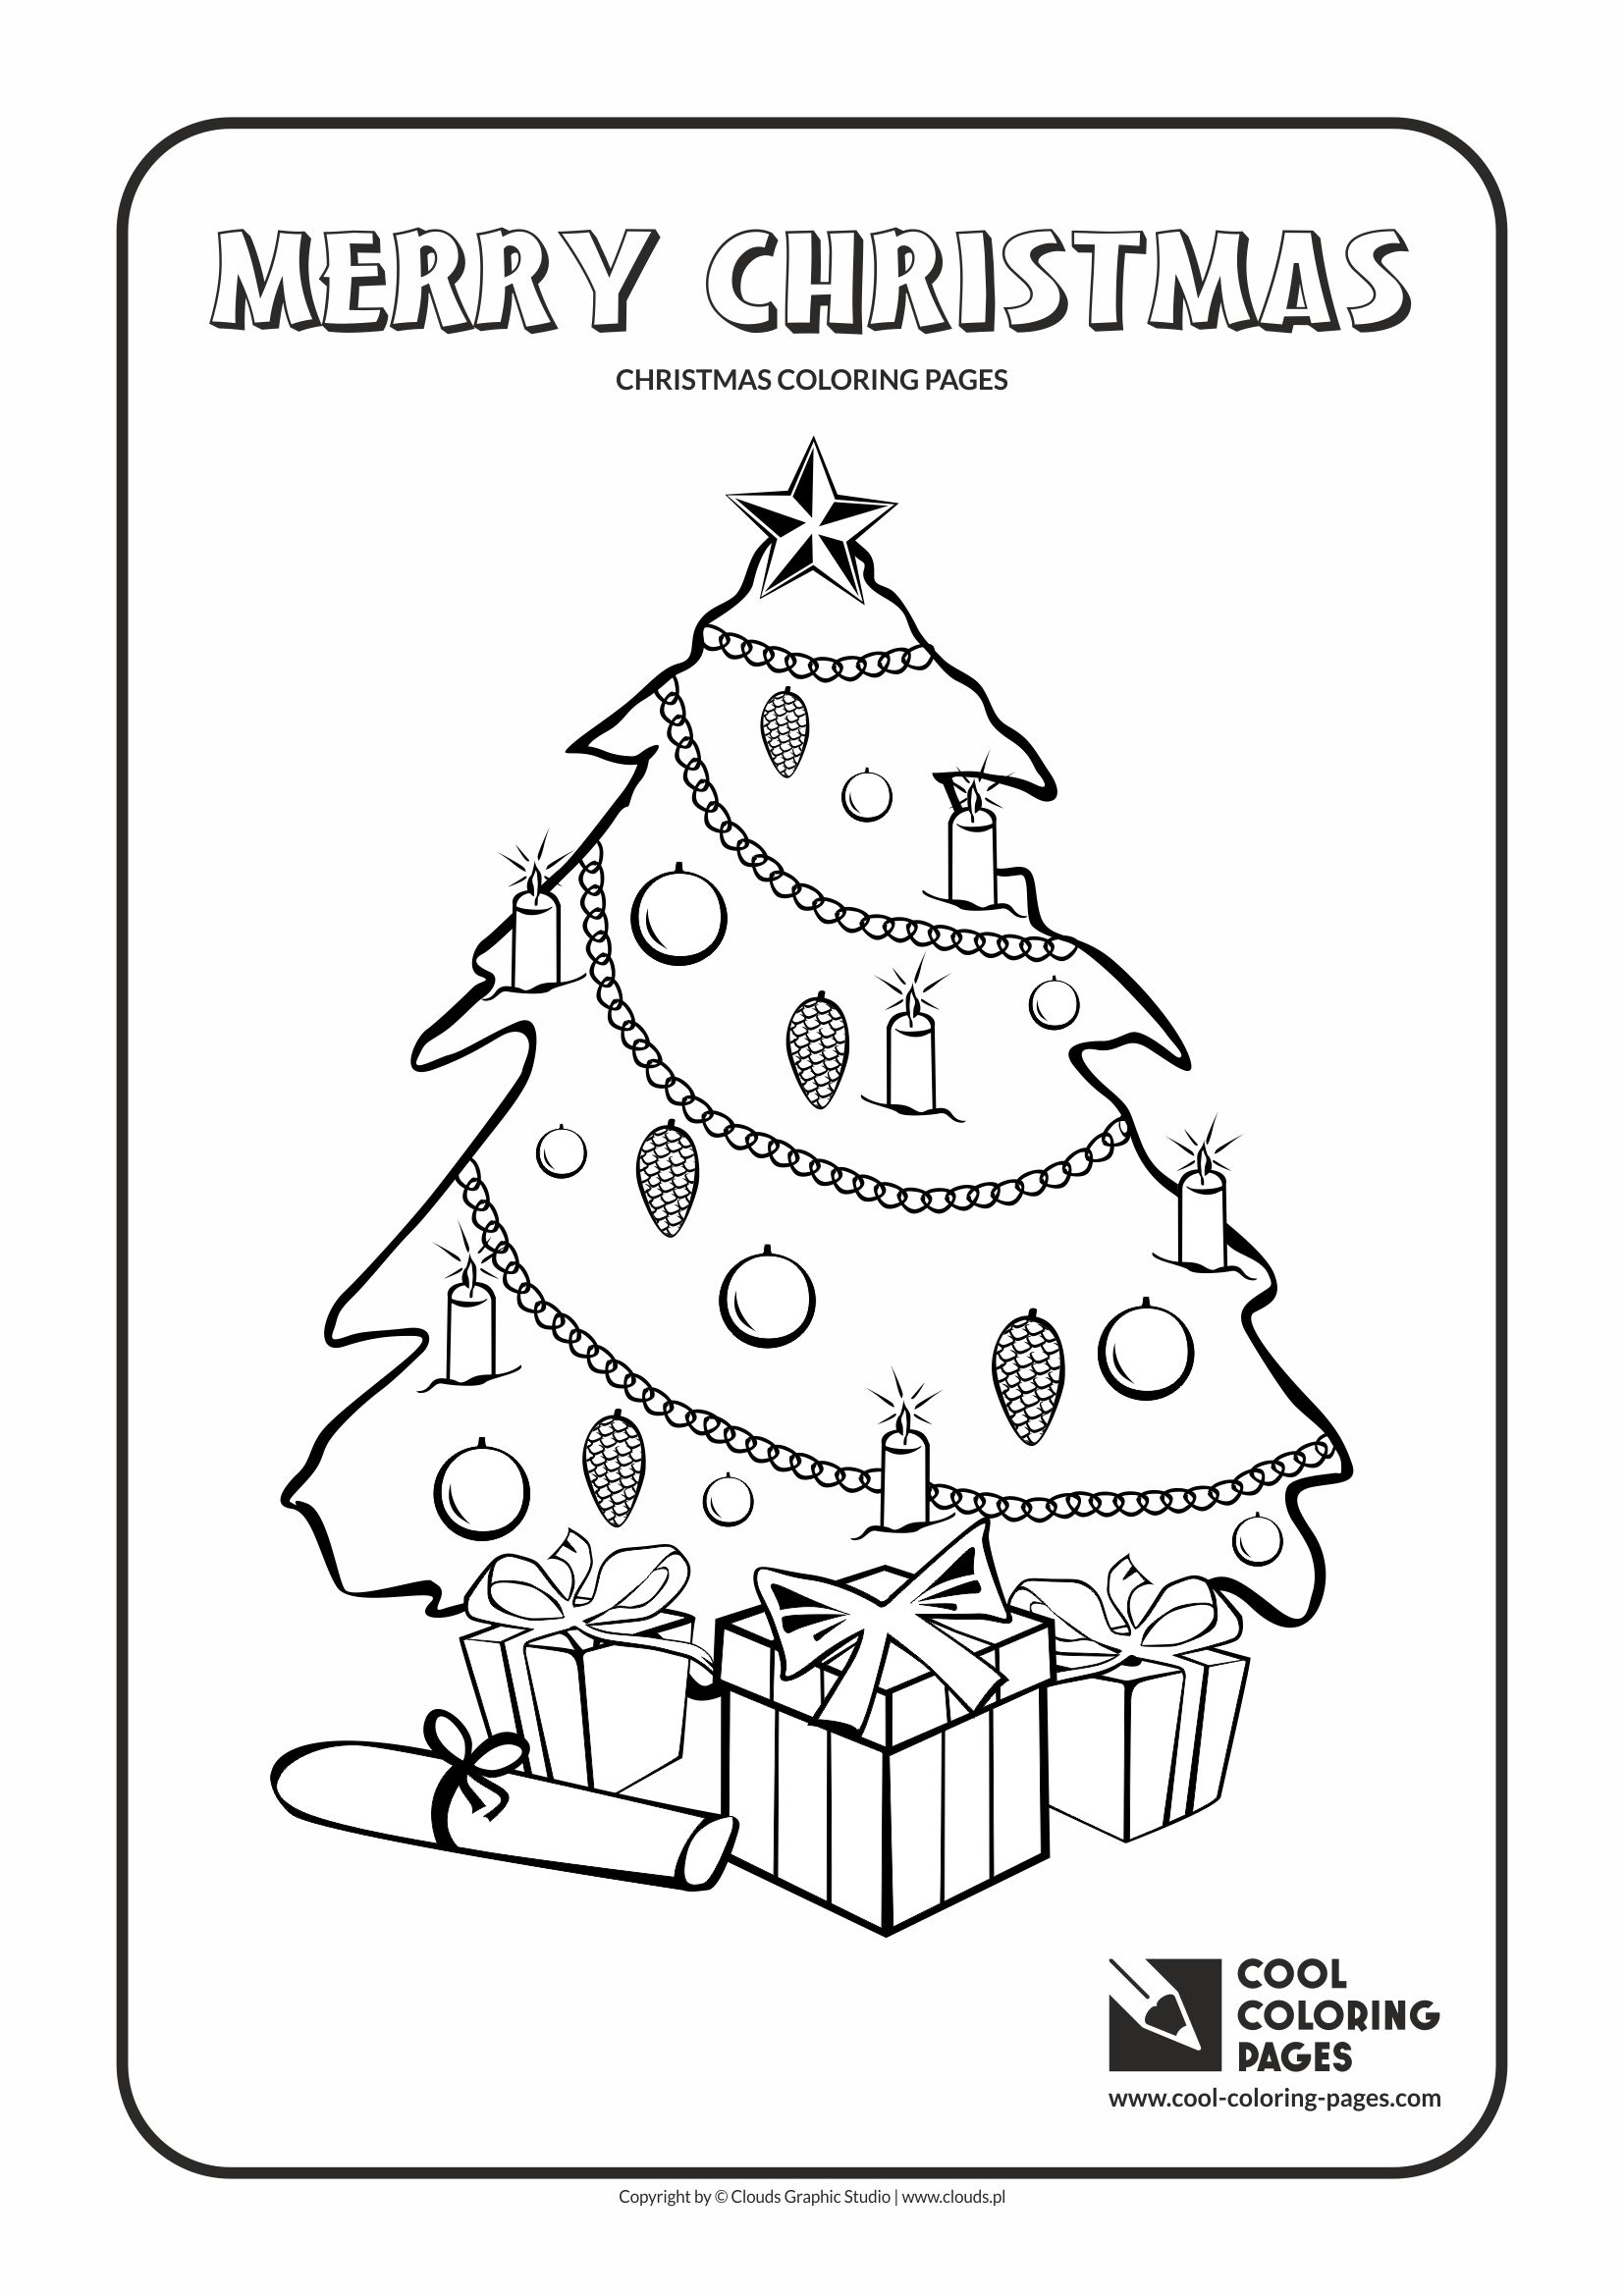 Cool Coloring Pages - Holidays / Christmas tree no 2 / Coloring page with Christmas tree no 2